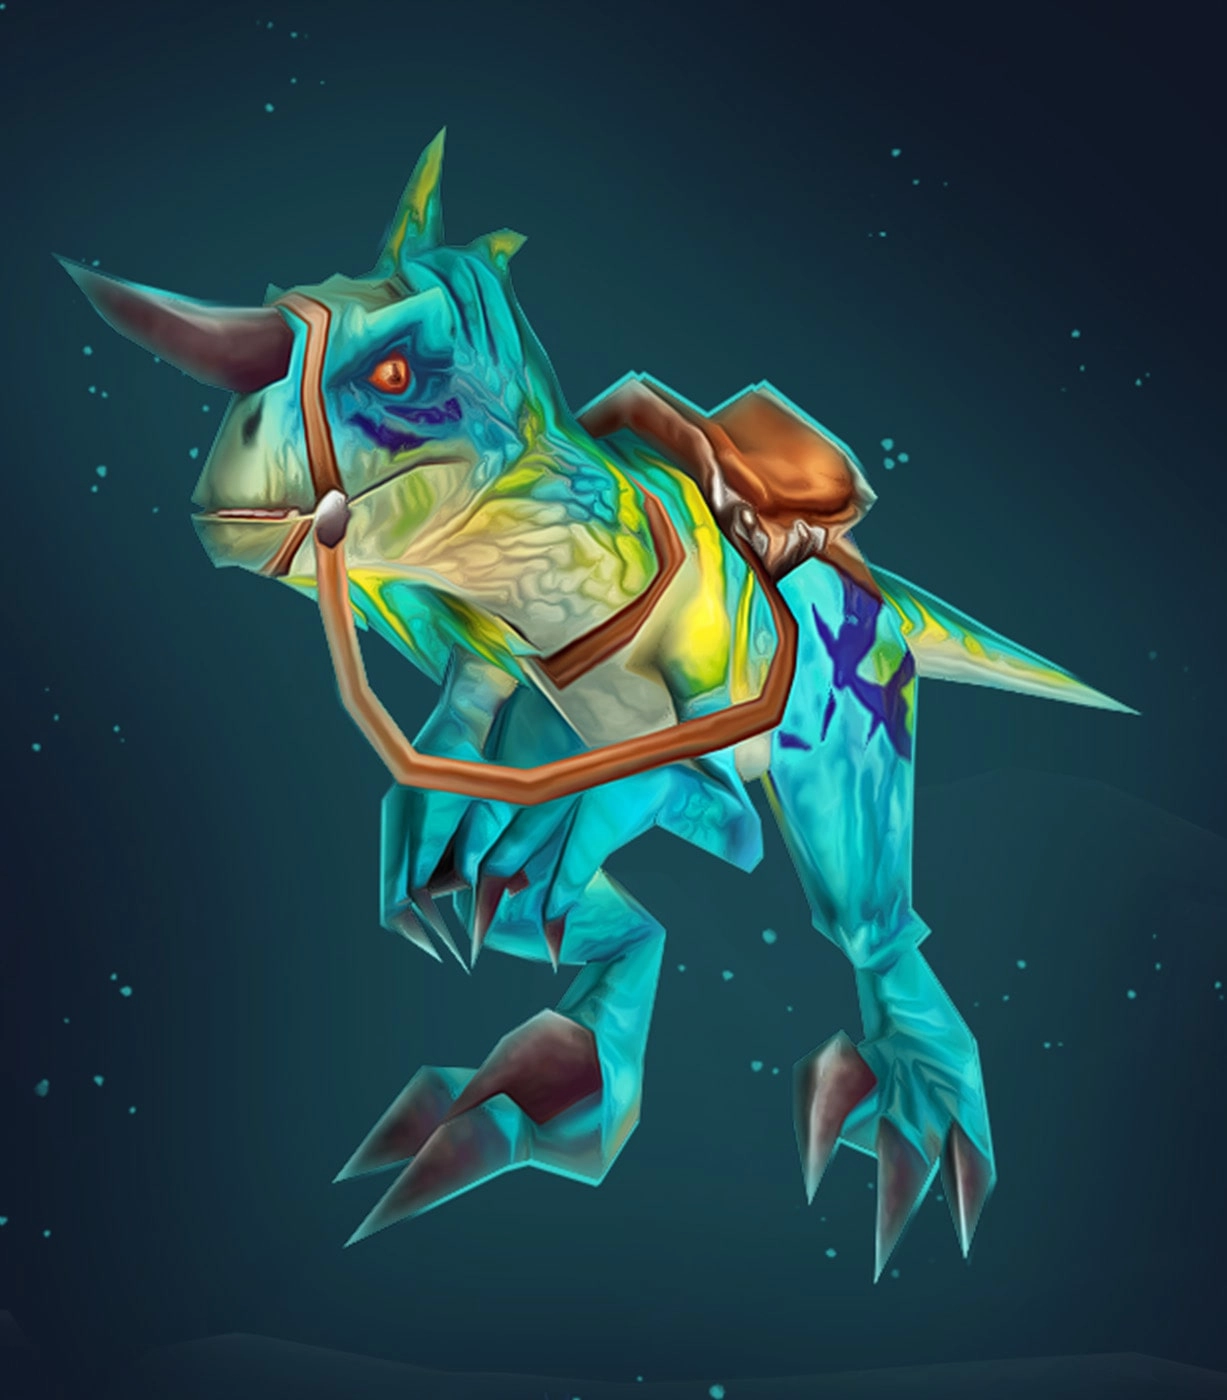 Whistle of the Turquoise Raptor Mount